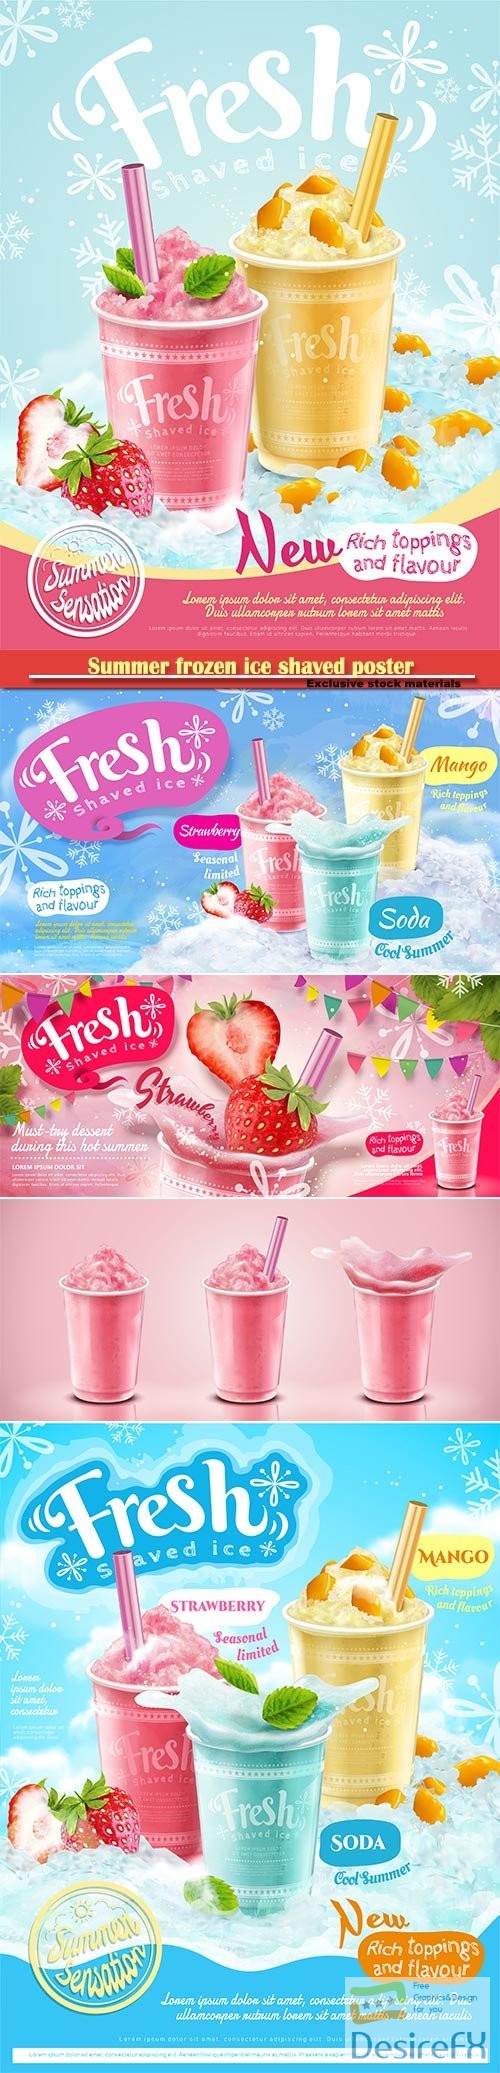 Summer frozen ice shaved poster with refreshing fruit and toppings in 3d illustration